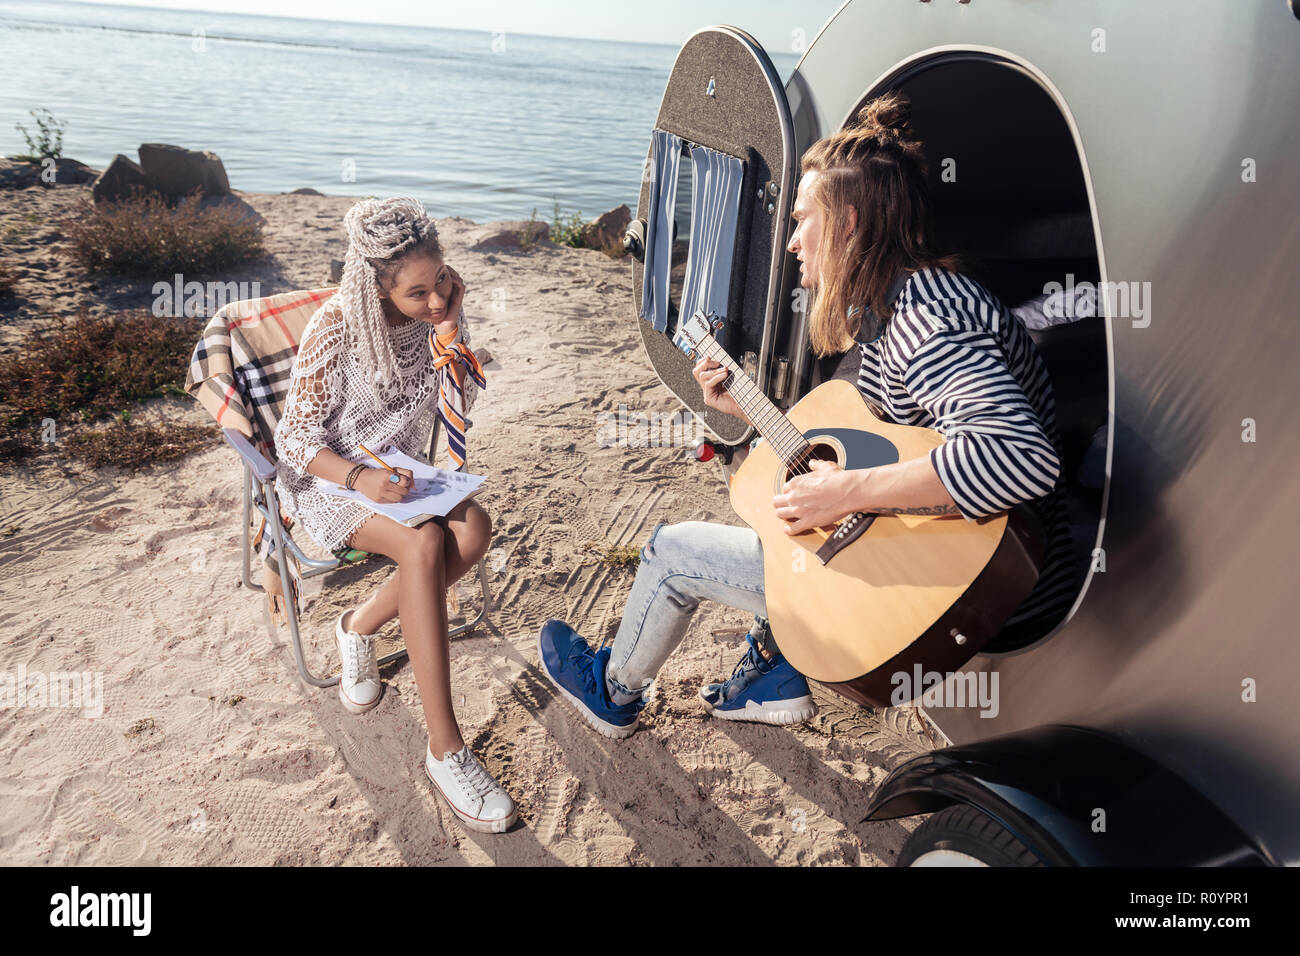 Woman with dreadlocks falling in love while listening to her man singing Stock Photo